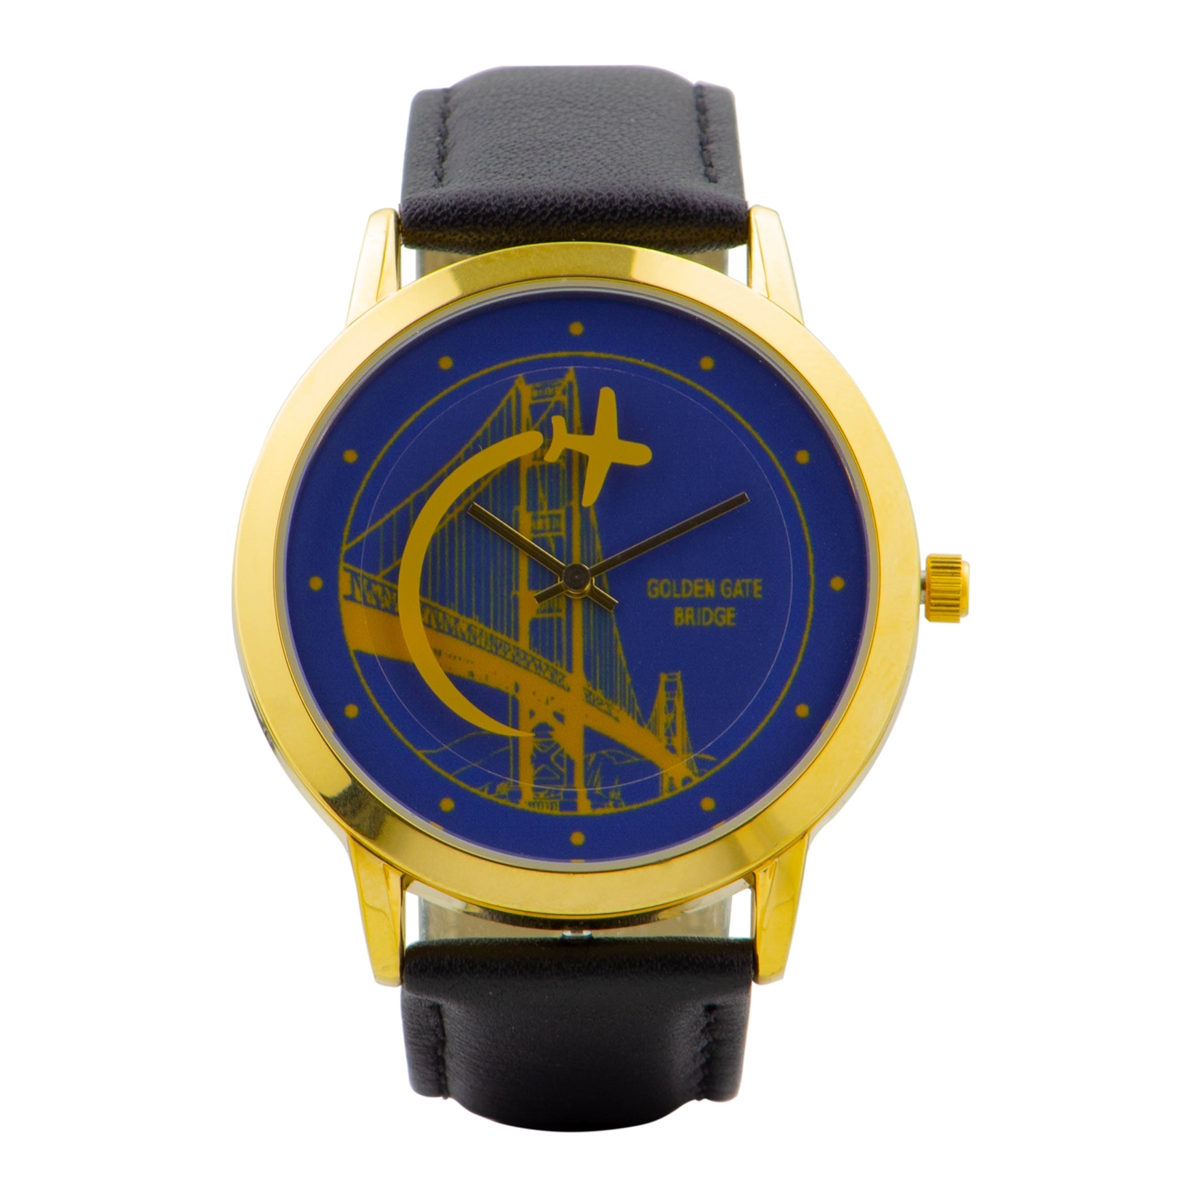 Now Corum Lets You Customize A Fire-Breathing Dragon Golden Bridge Watch,  Here's What I Would Want - ATimelyPerspective